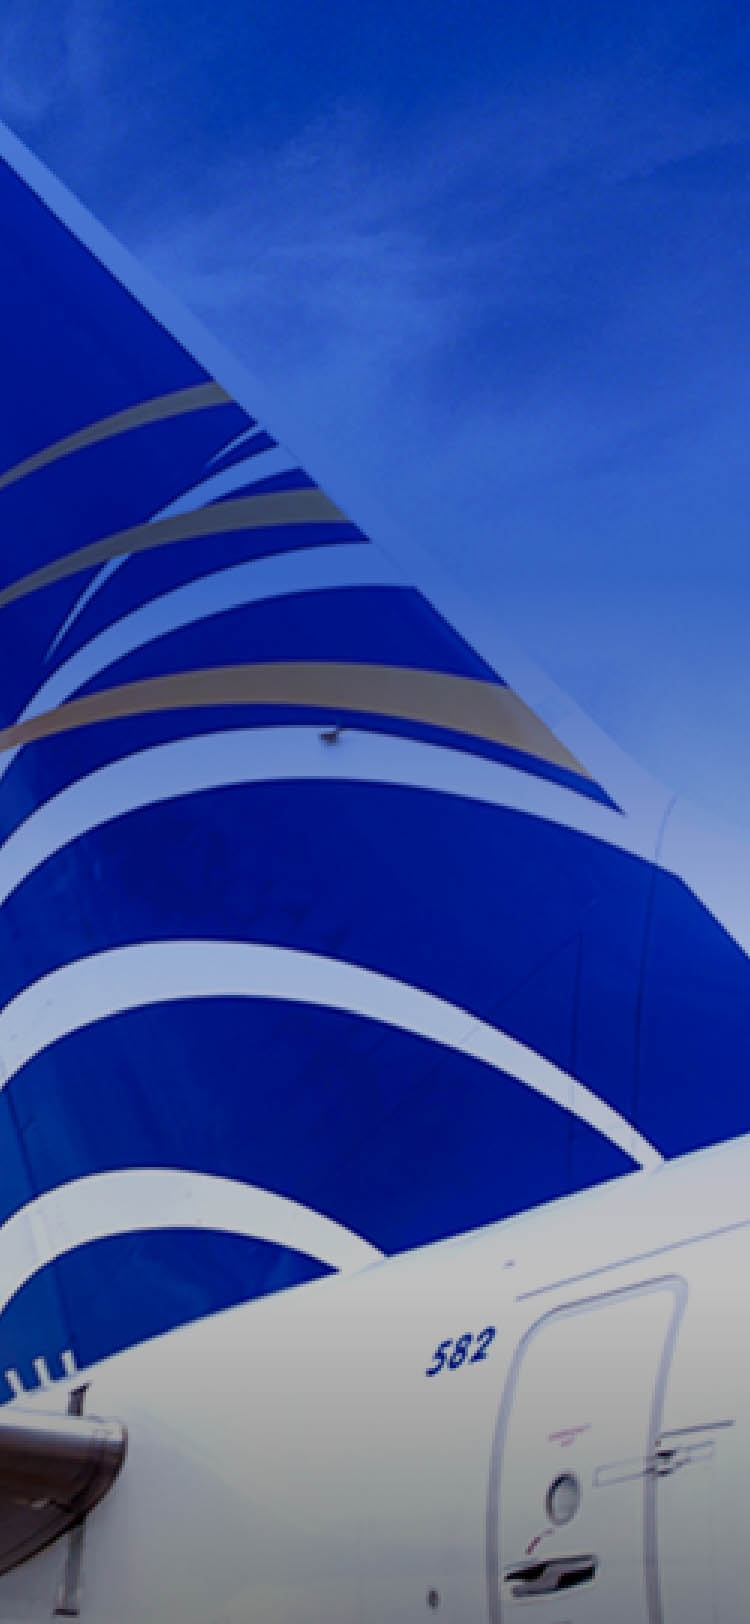 Meet Copa Airlines' new Dreams Business Class and Economy Extra.